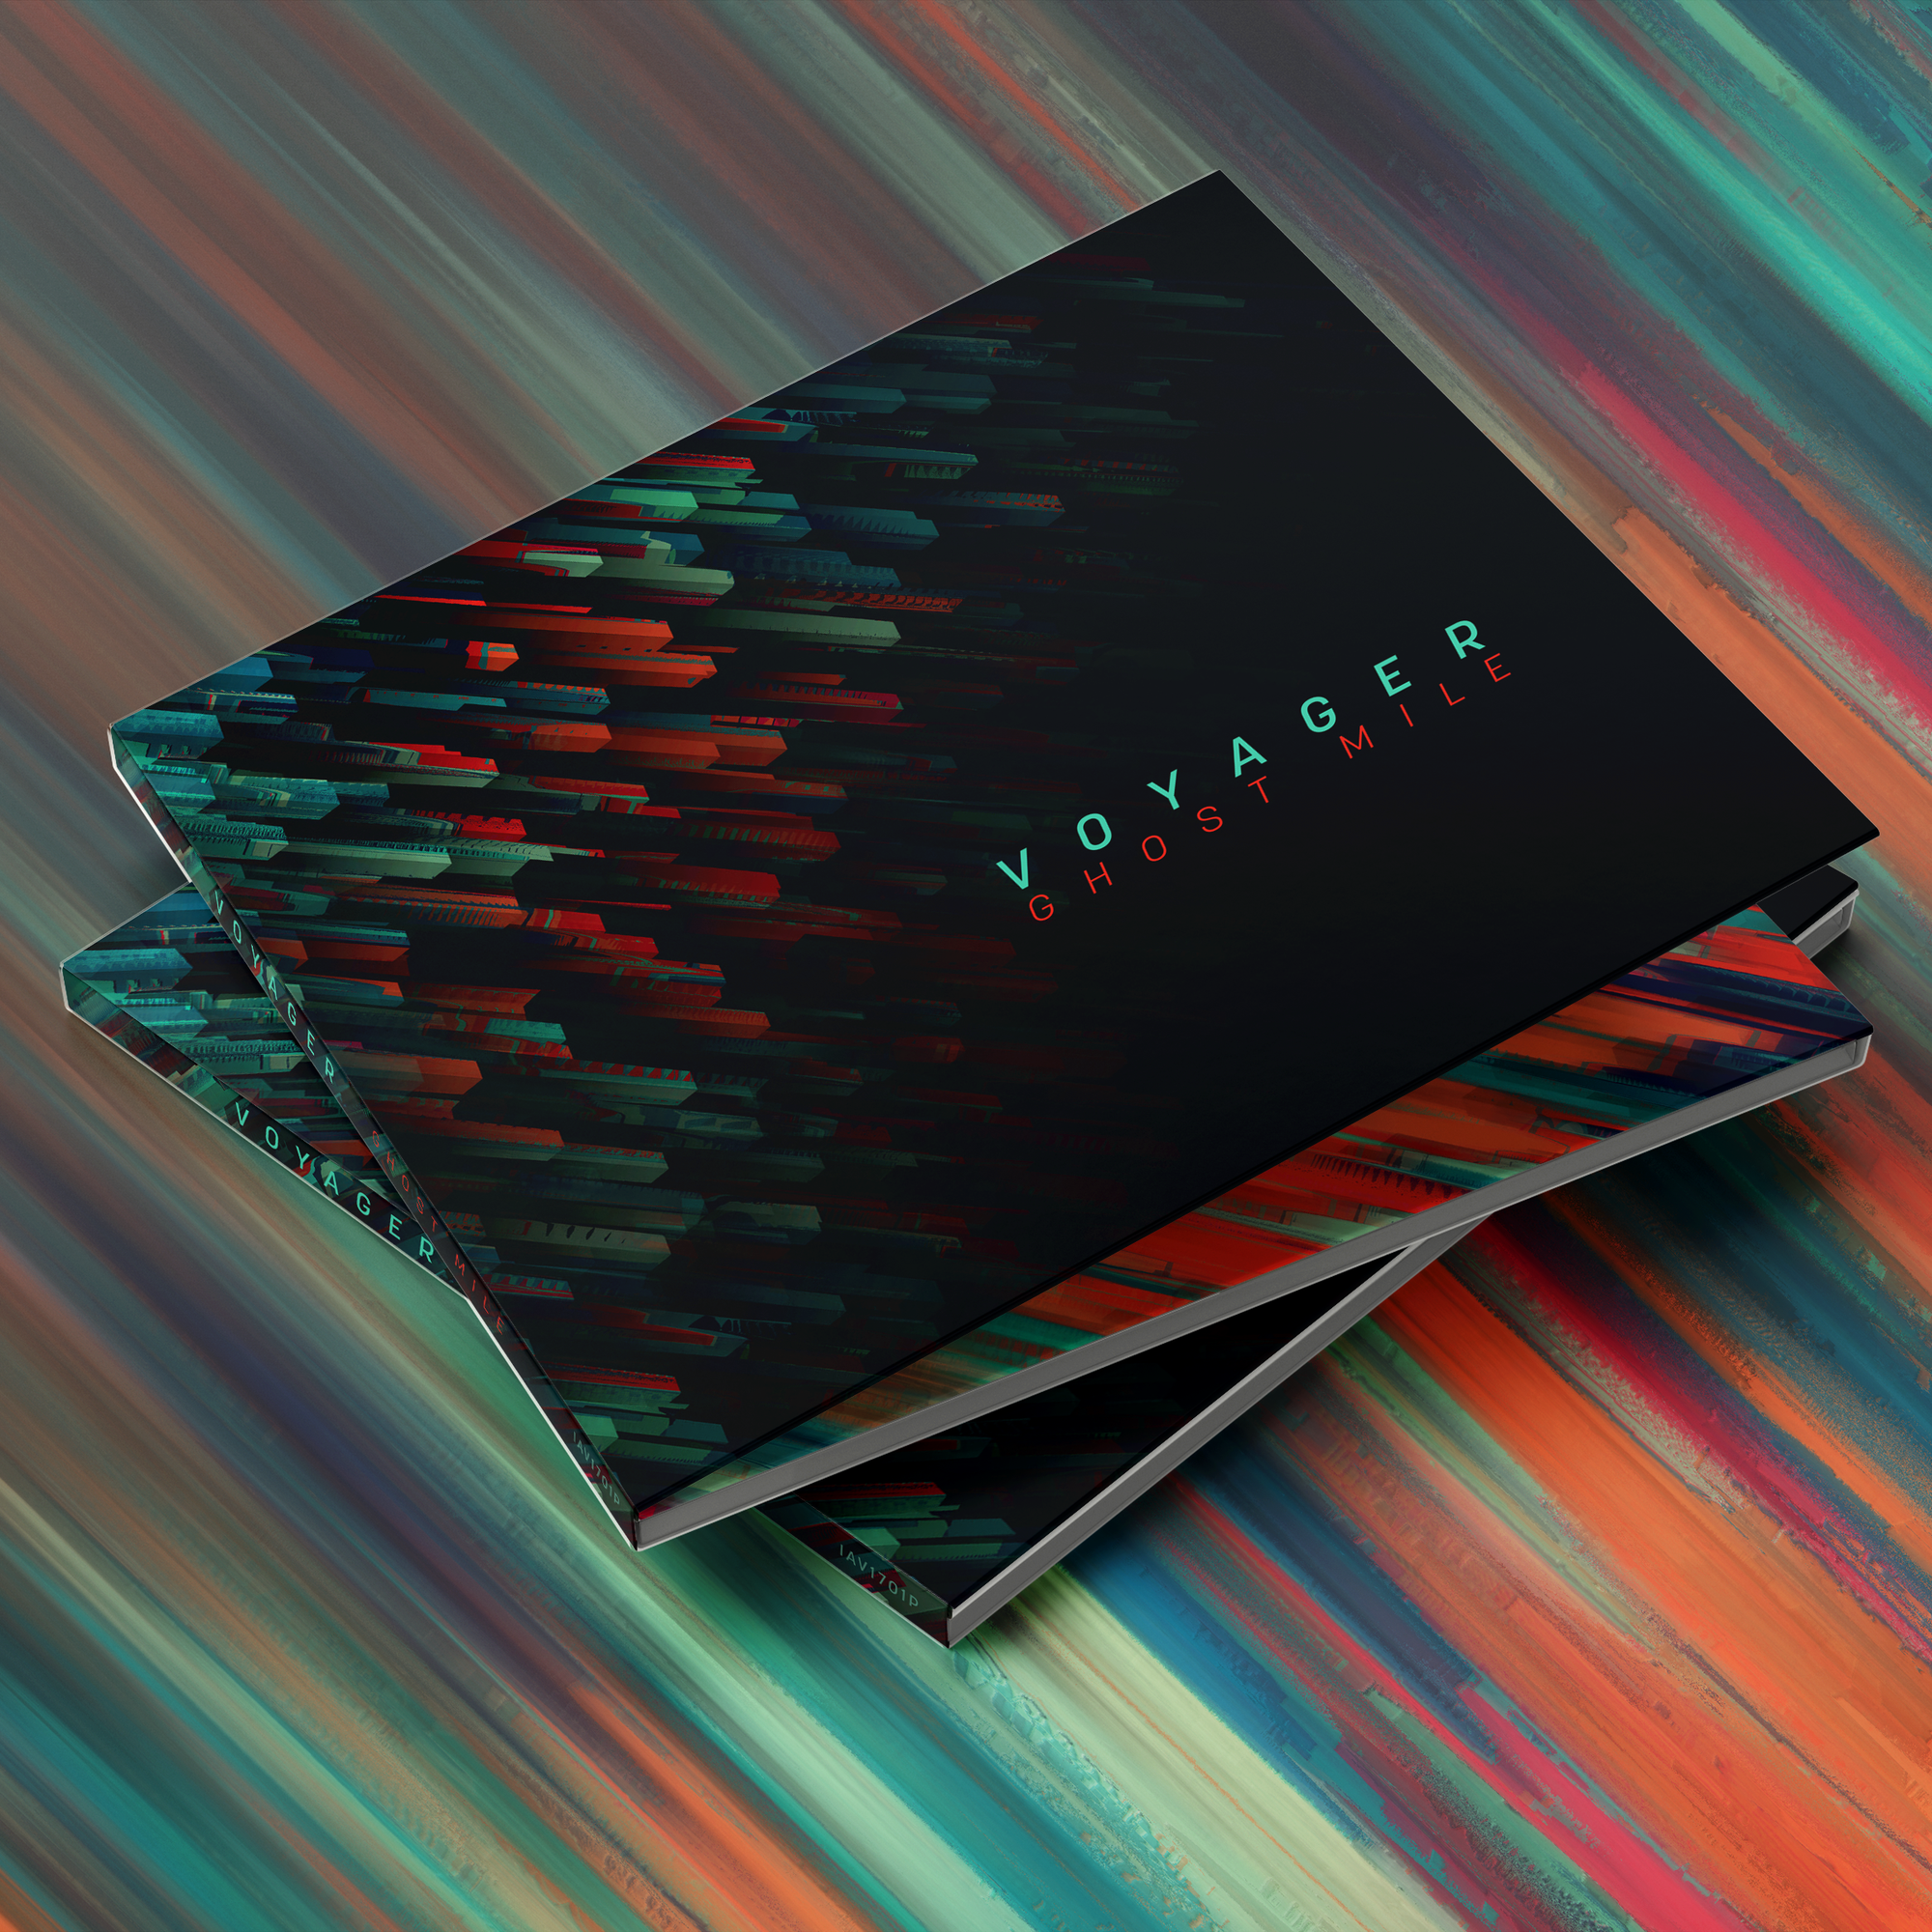 VOYAGER // GHOST MILE - CD DIGIPAK - Wild Thing Records